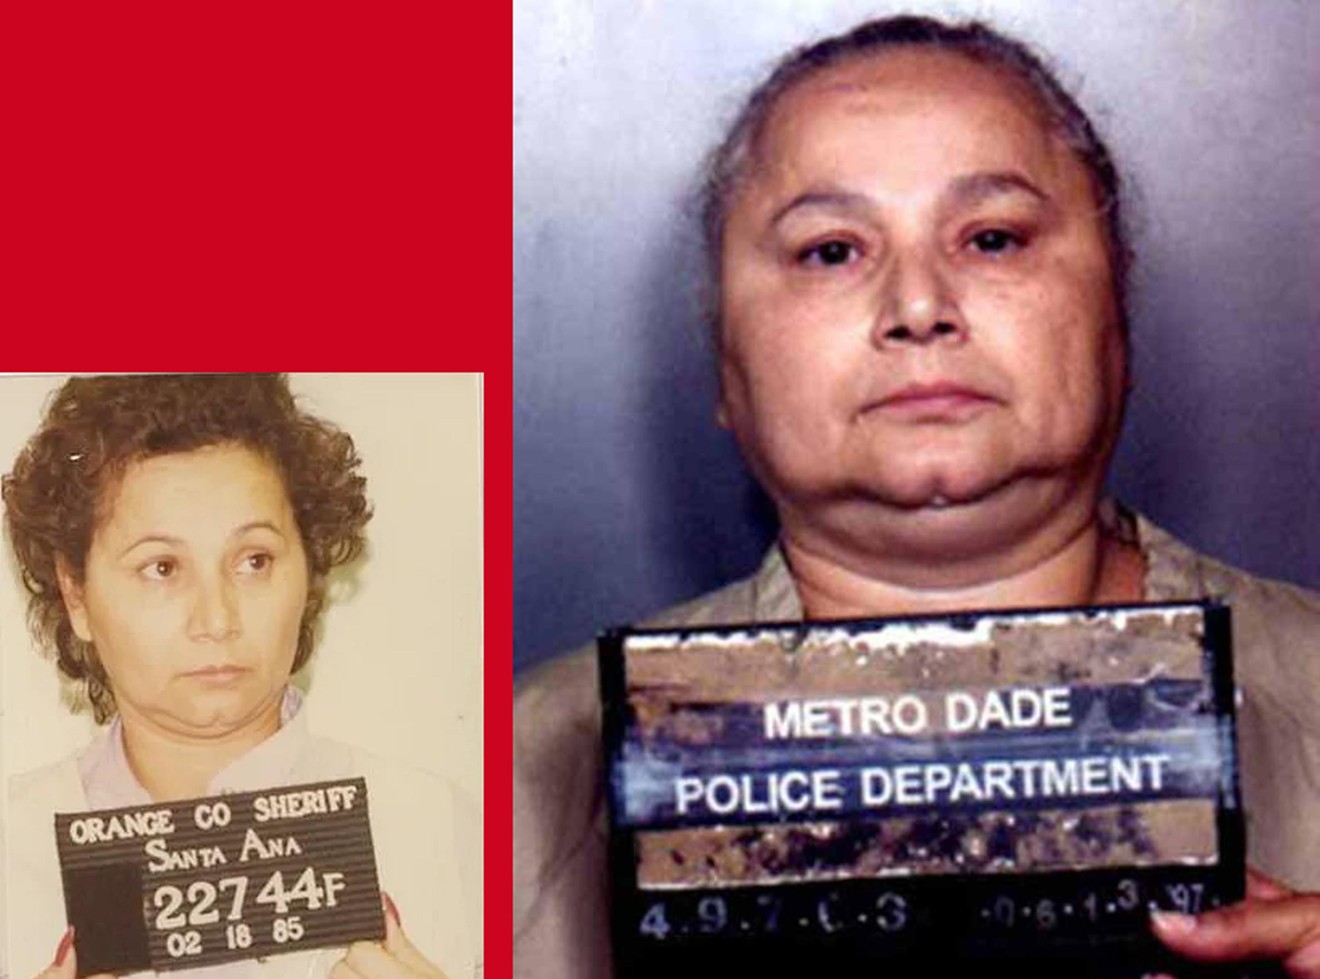 Griselda Blanco, notorious Queen of Cocaine, in 1985 and 1997